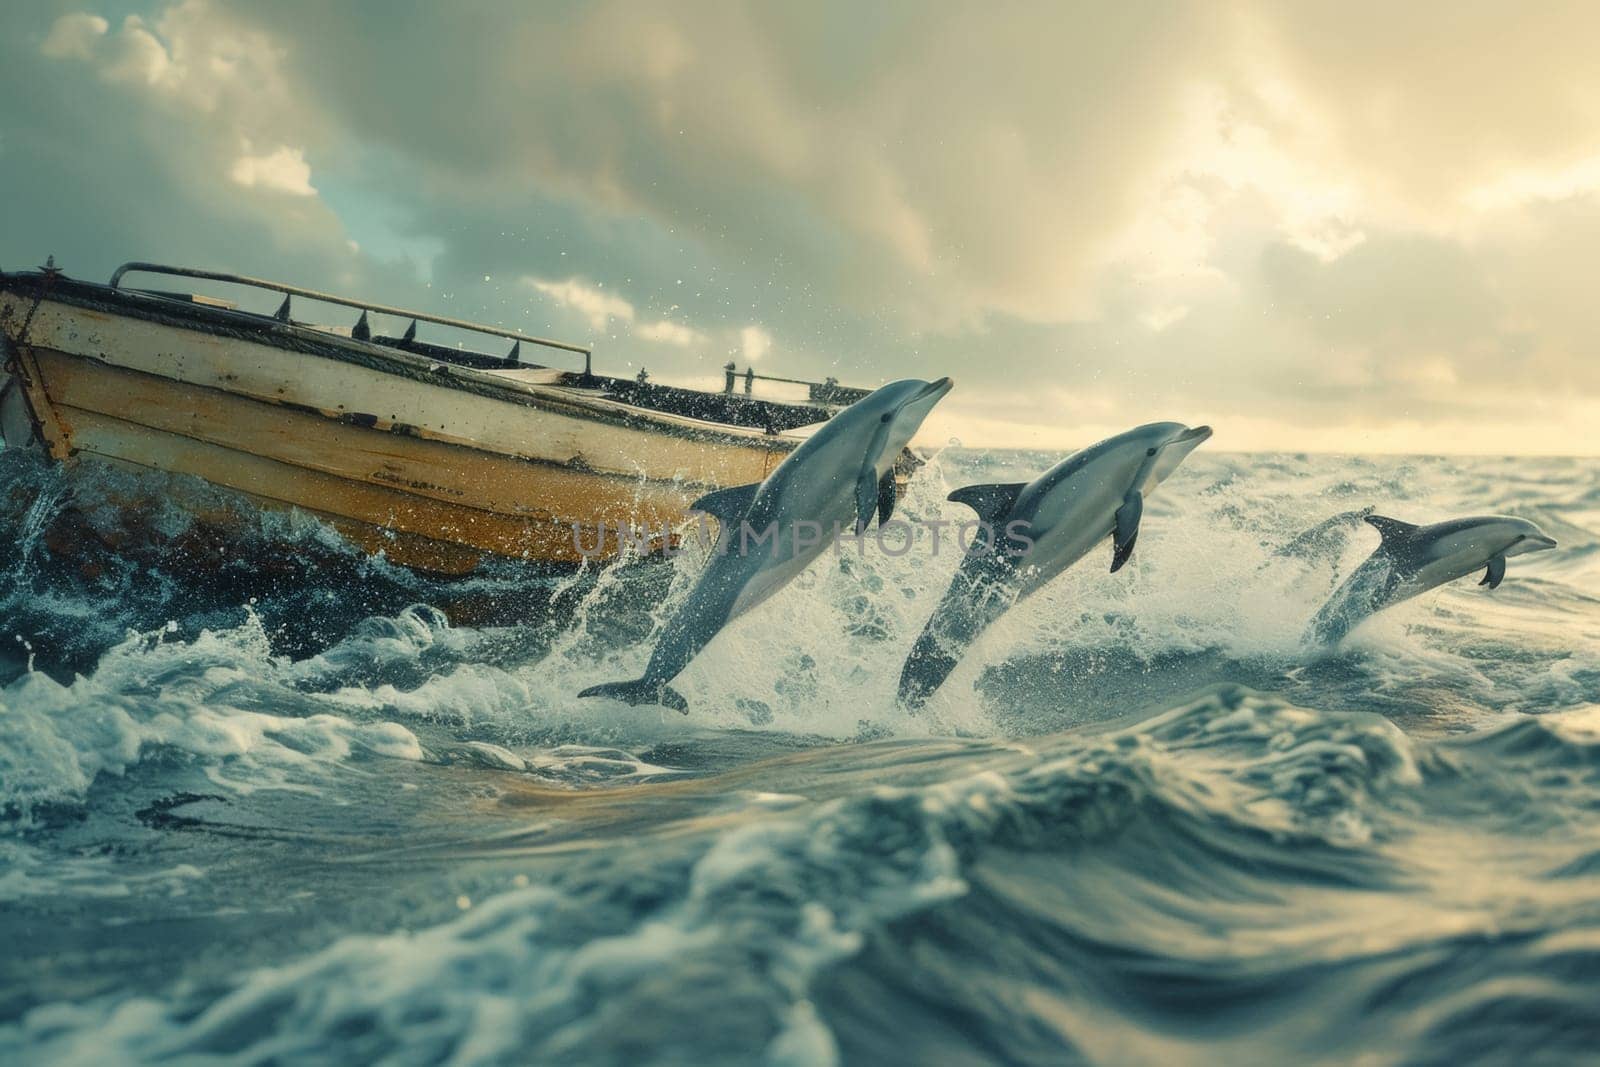 A pod of dolphins leaps energetically alongside an aged boat amidst the churning sea, with dynamic water and dramatic lighting adding to the action.